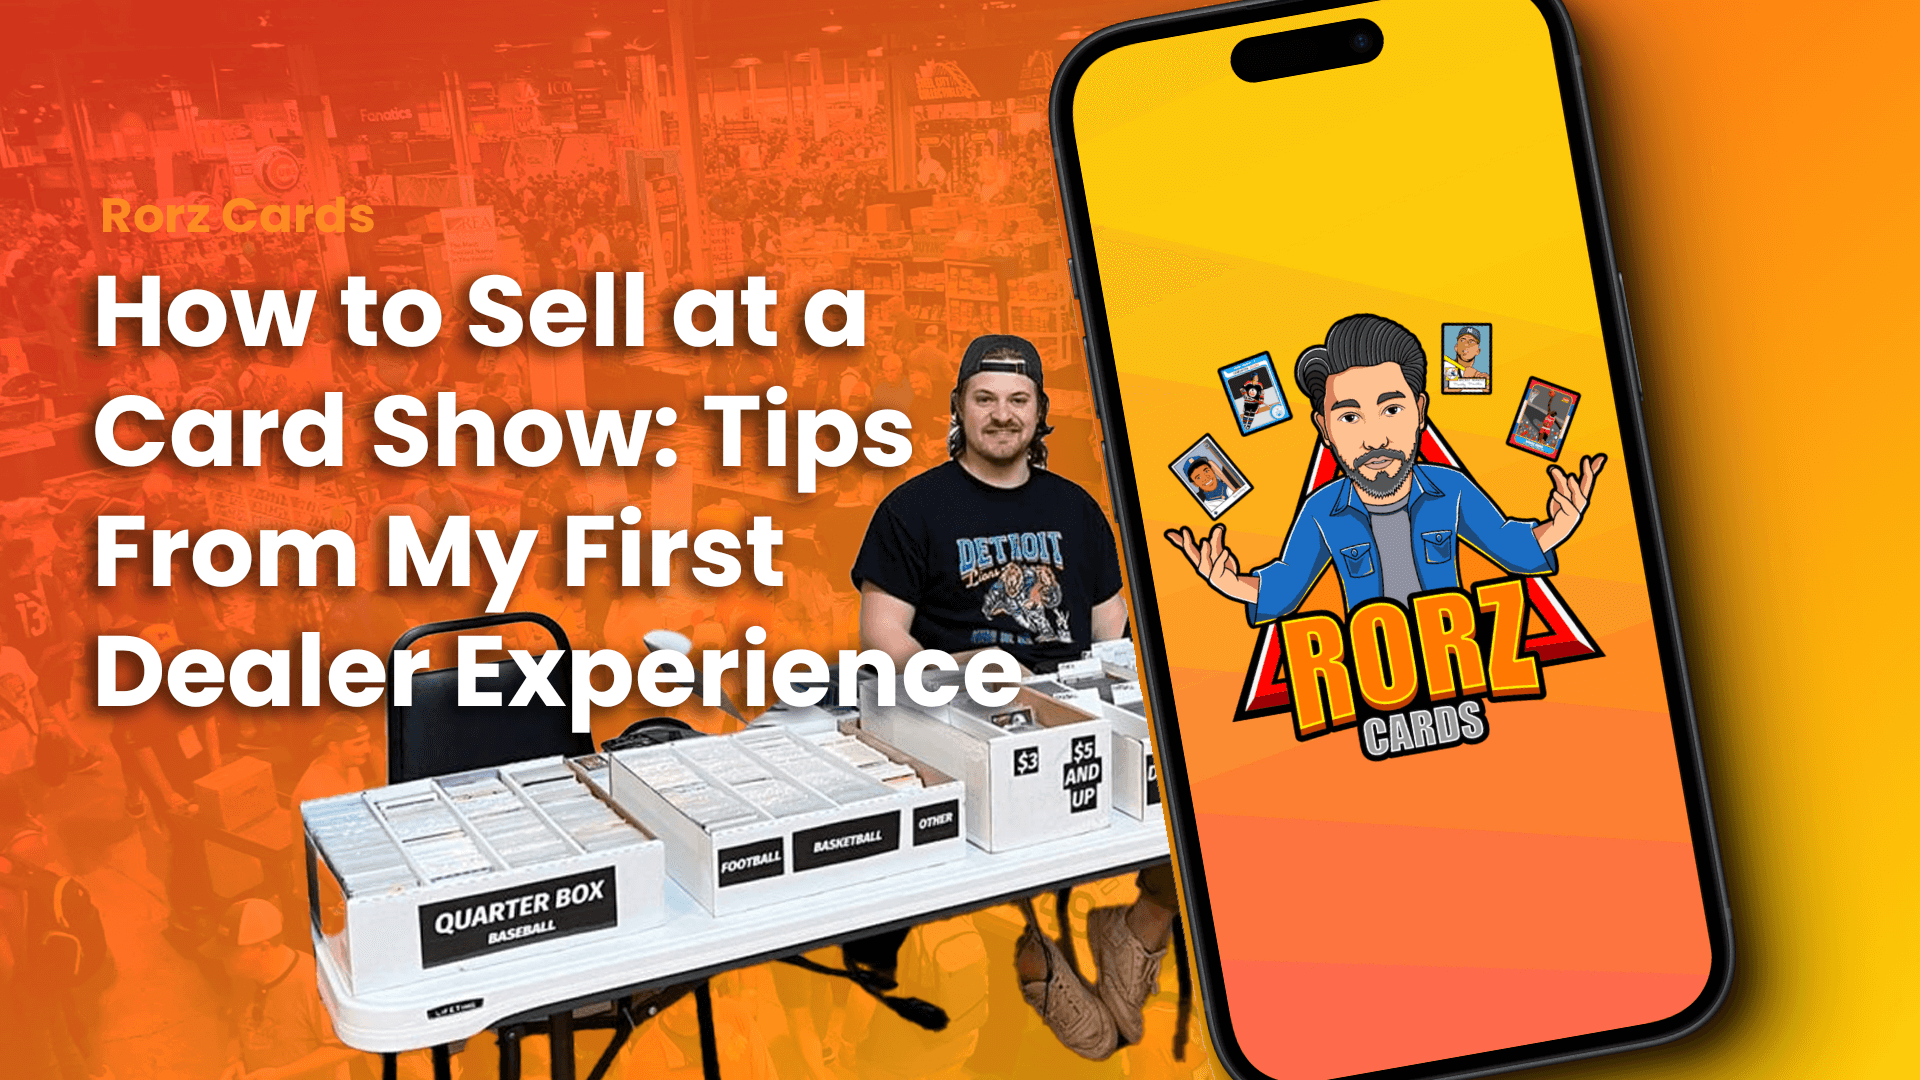 How To Sell Cards at a Card Show